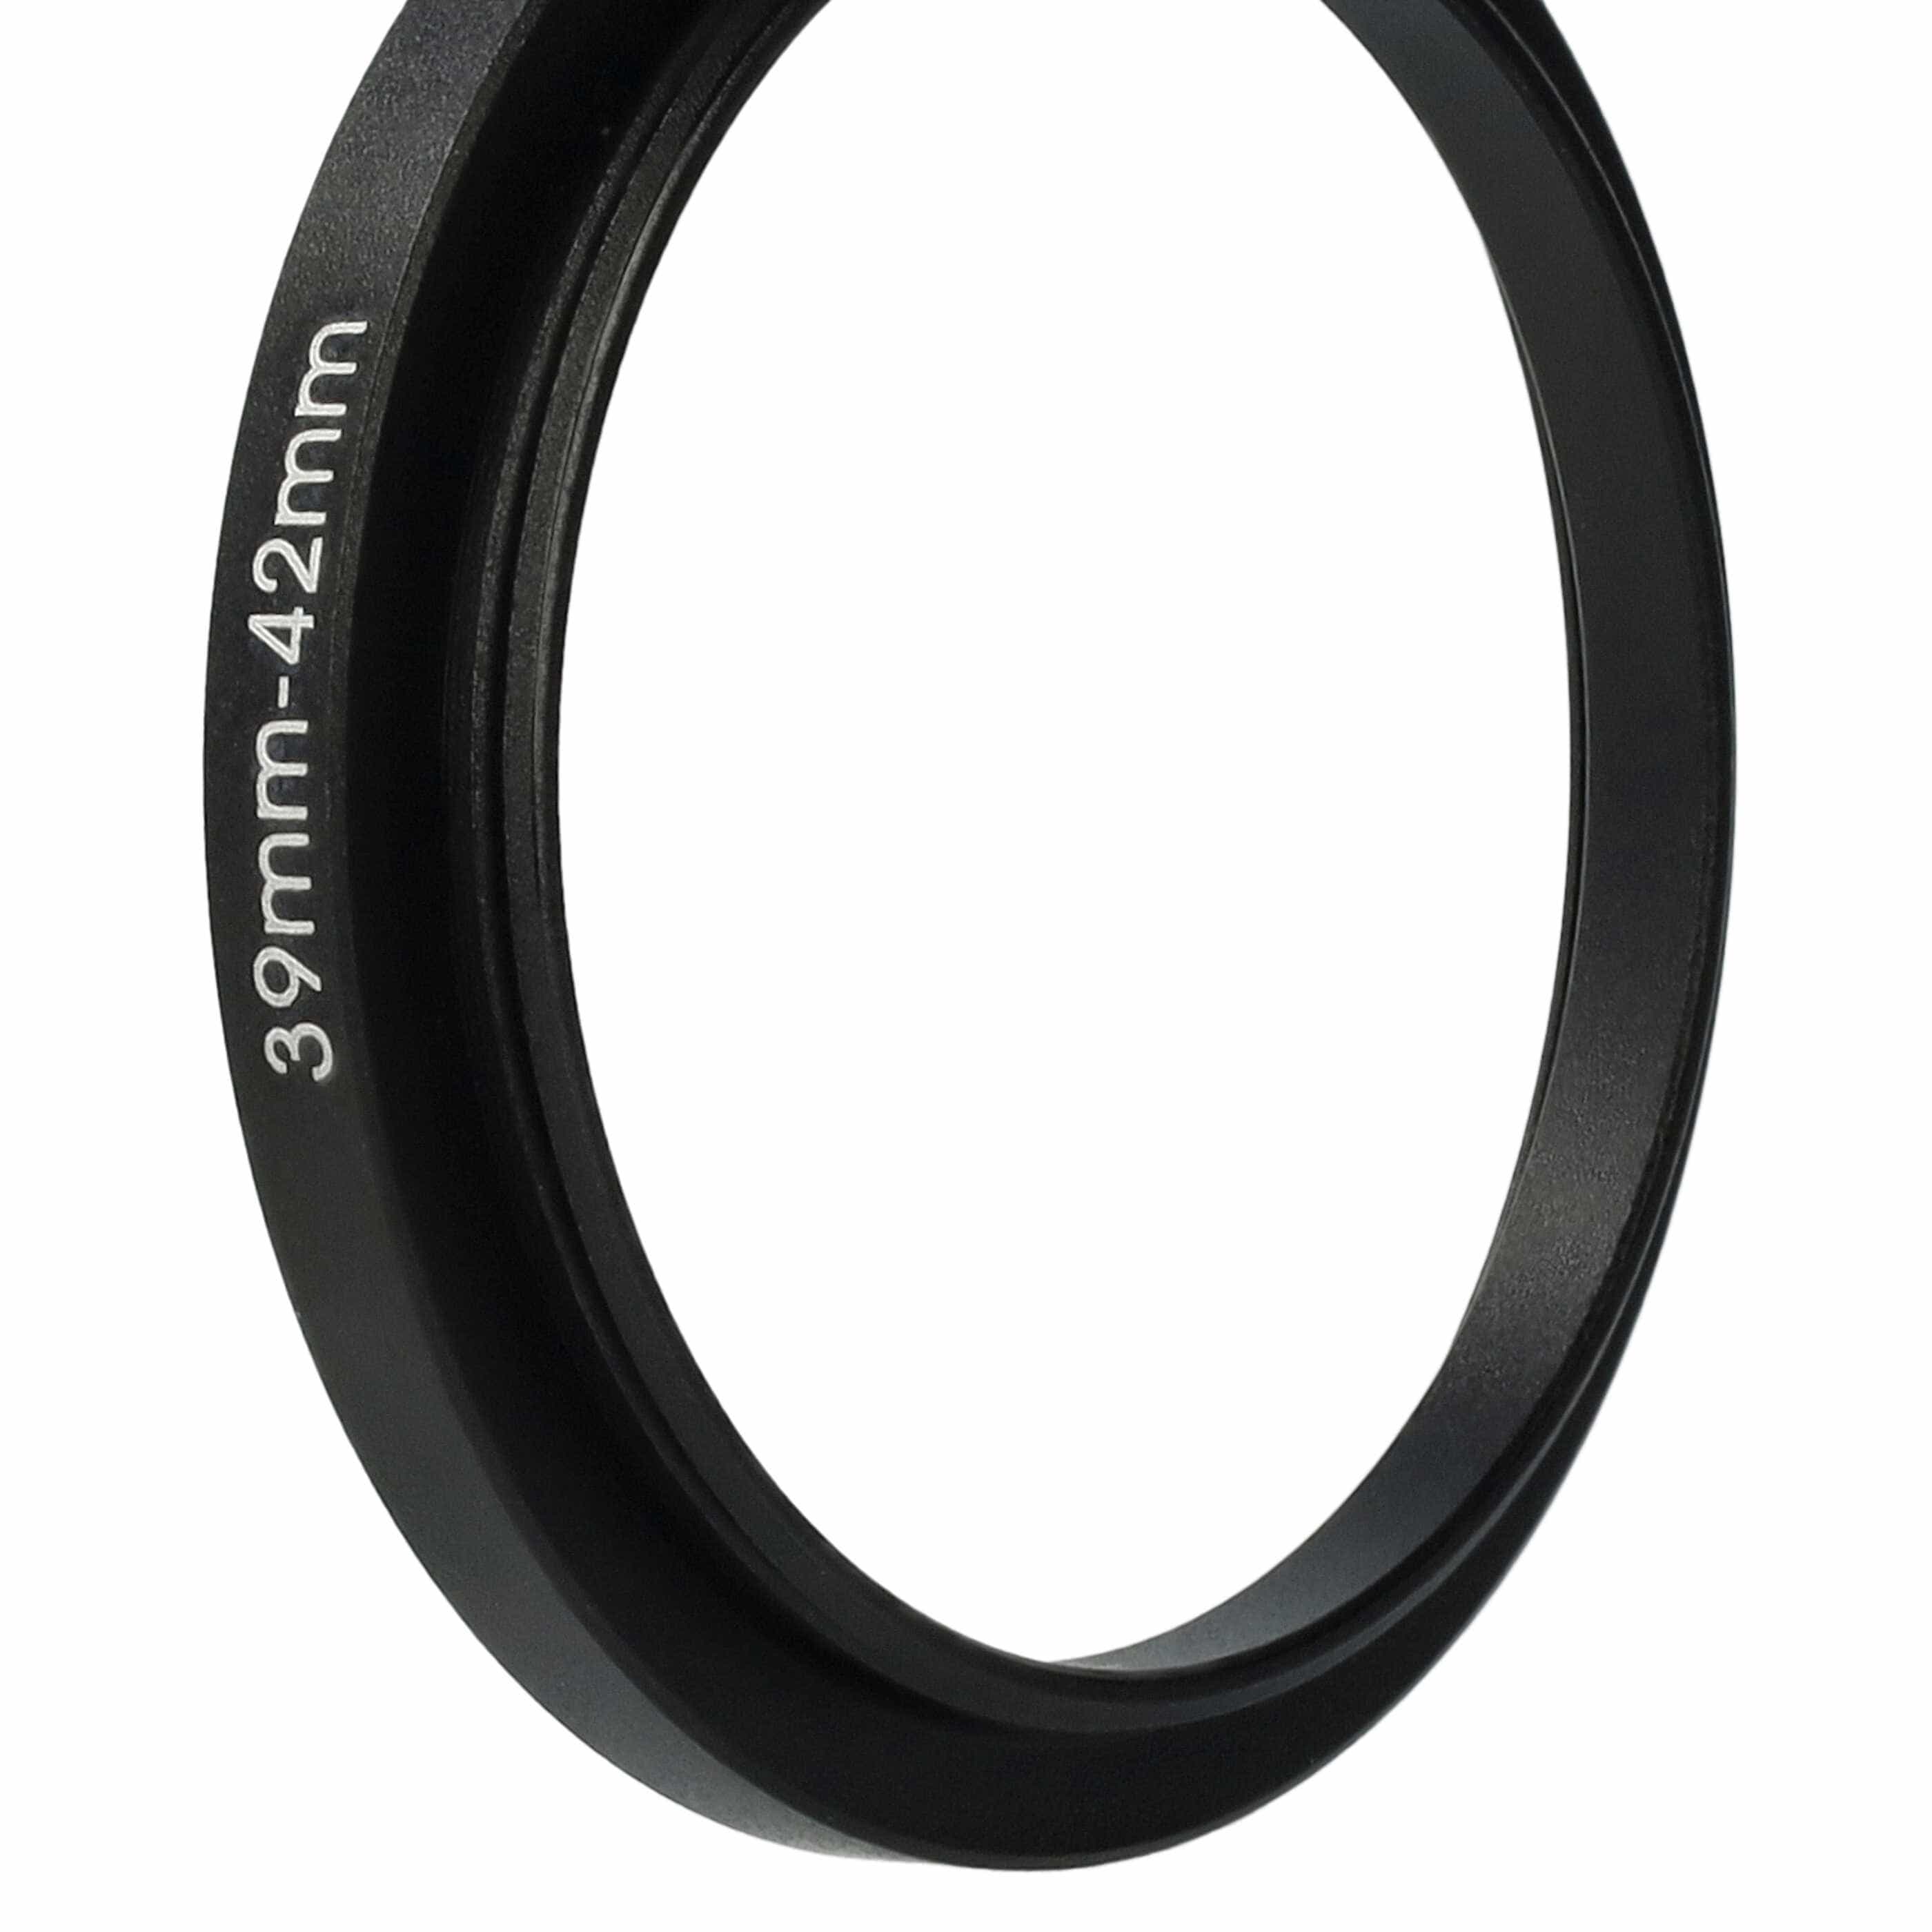 Step-Up Ring Adapter of 39 mm to 42 mmfor various Camera Lens - Filter Adapter